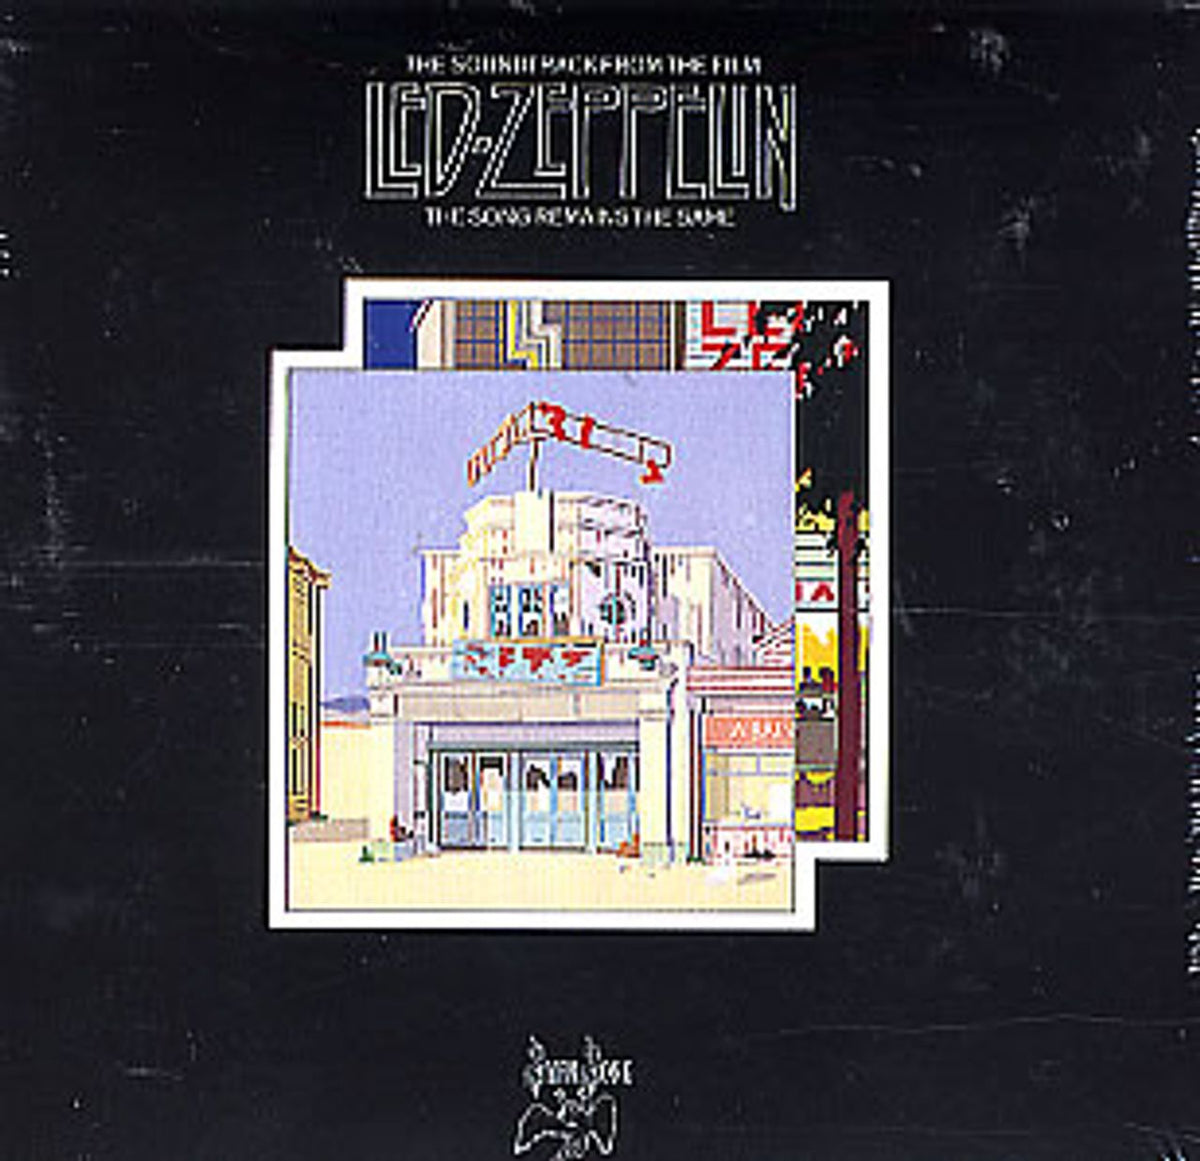 Led Zeppelin The Song Remains The Same: Remastered - Sealed 